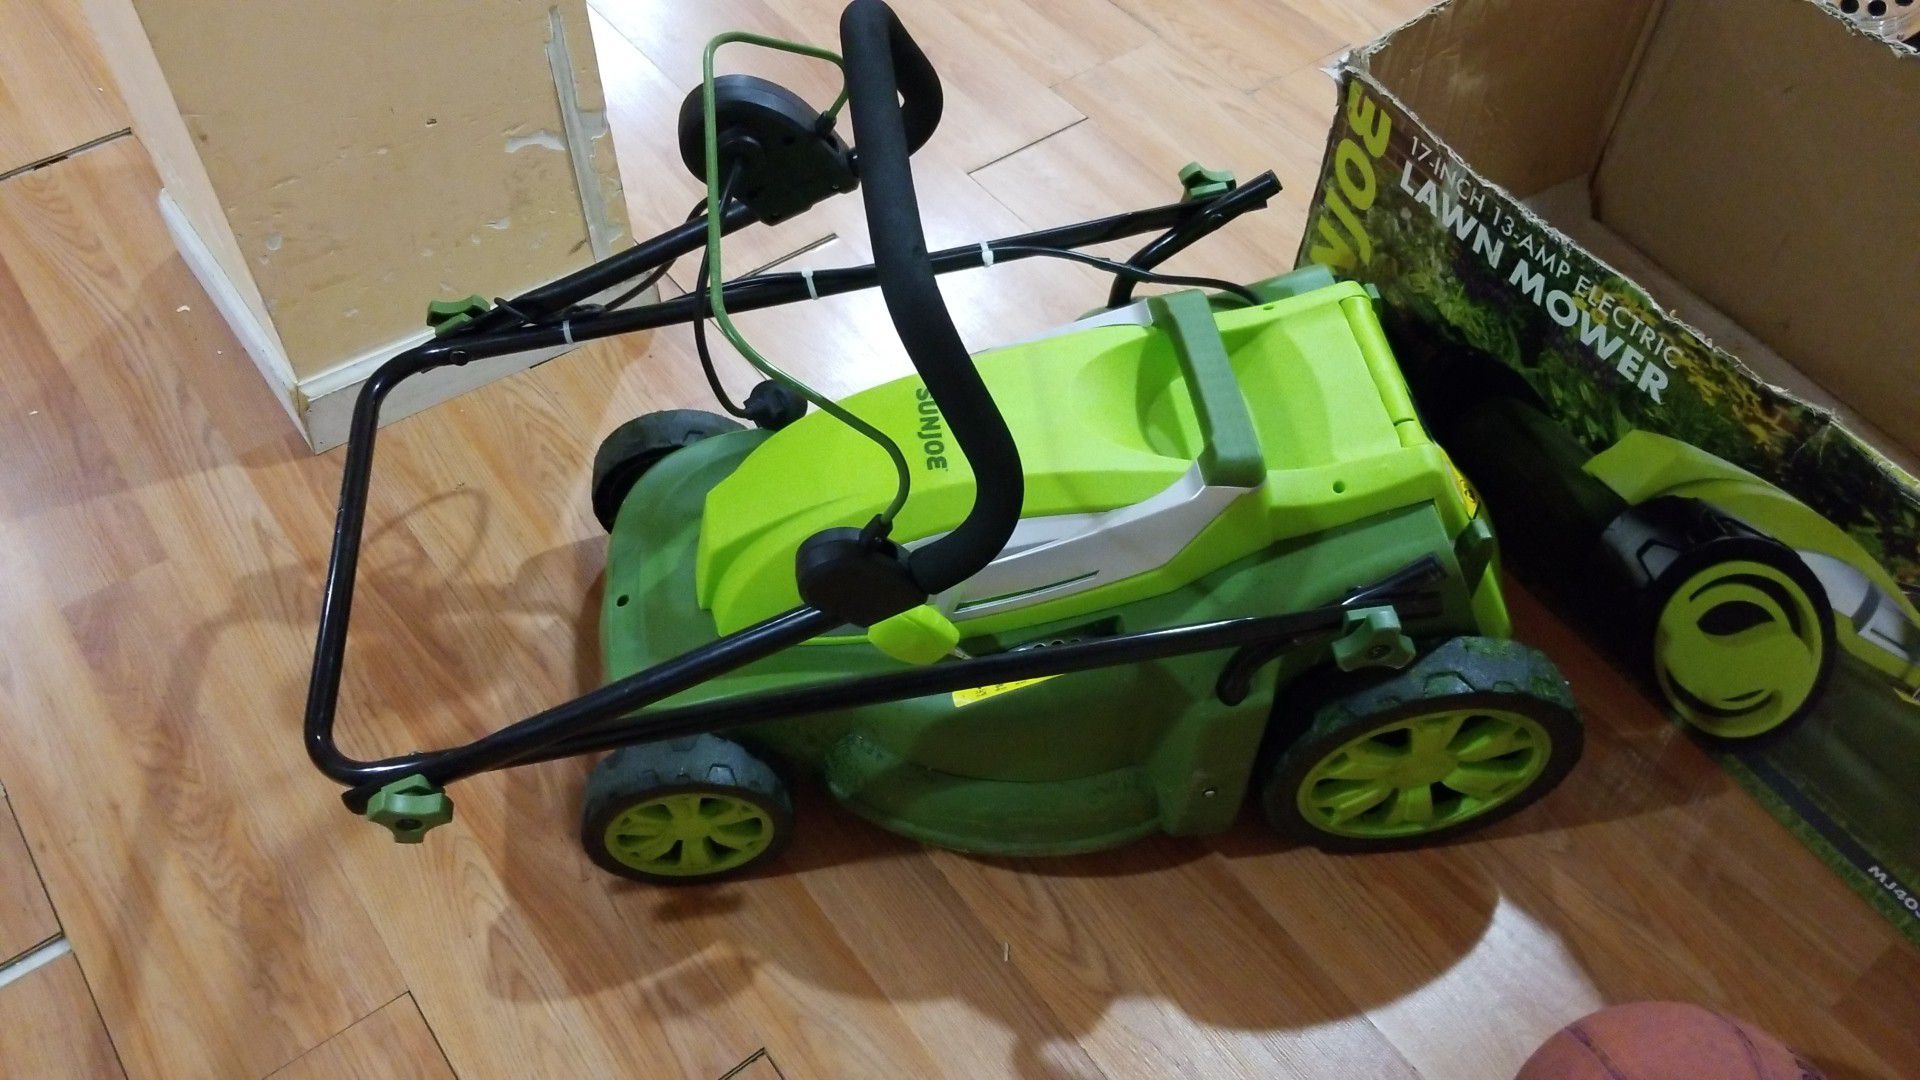 Electric lawn mower & leaf blower sold together